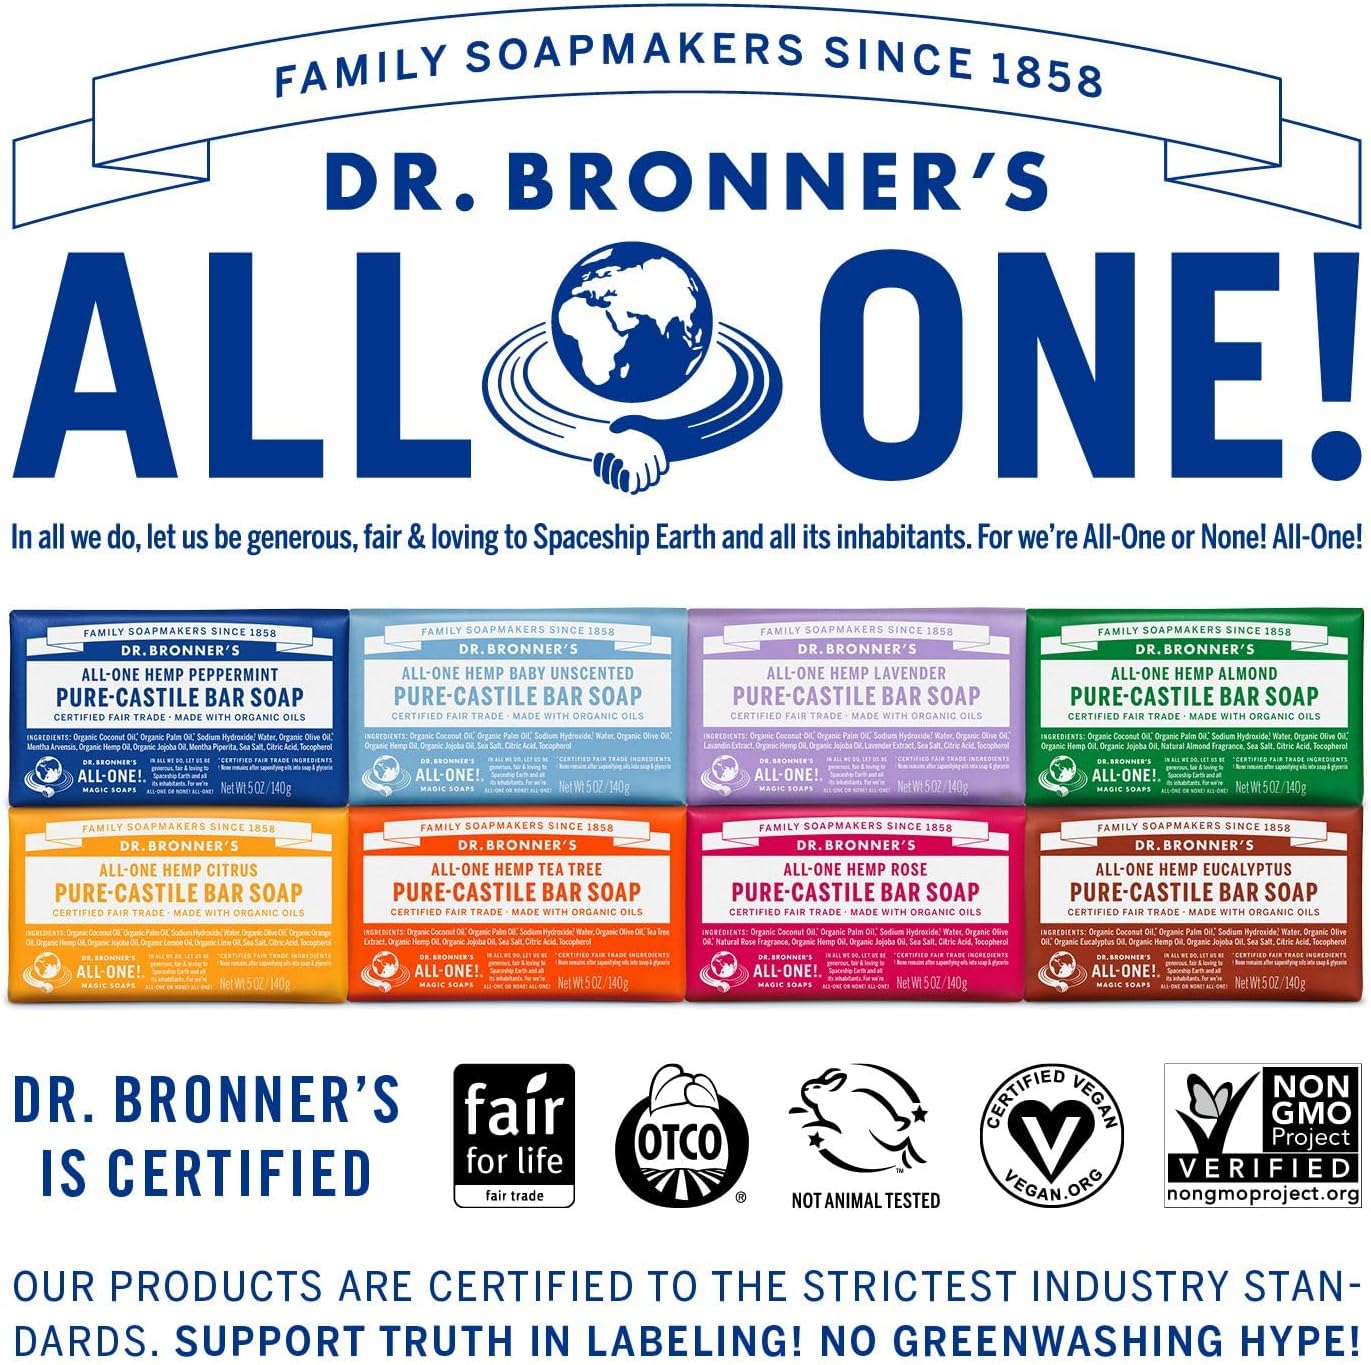 Dr. Bronner’s - Pure-Castile Bar Soap (Citrus, 5 ounce) - Made with Organic Oils, For Face, Body and Hair, Gentle and Moisturizing, Biodegradable, Vegan, Cruelty-free, Non-GMO : Baby Bar Soaps : Beauty & Personal Care